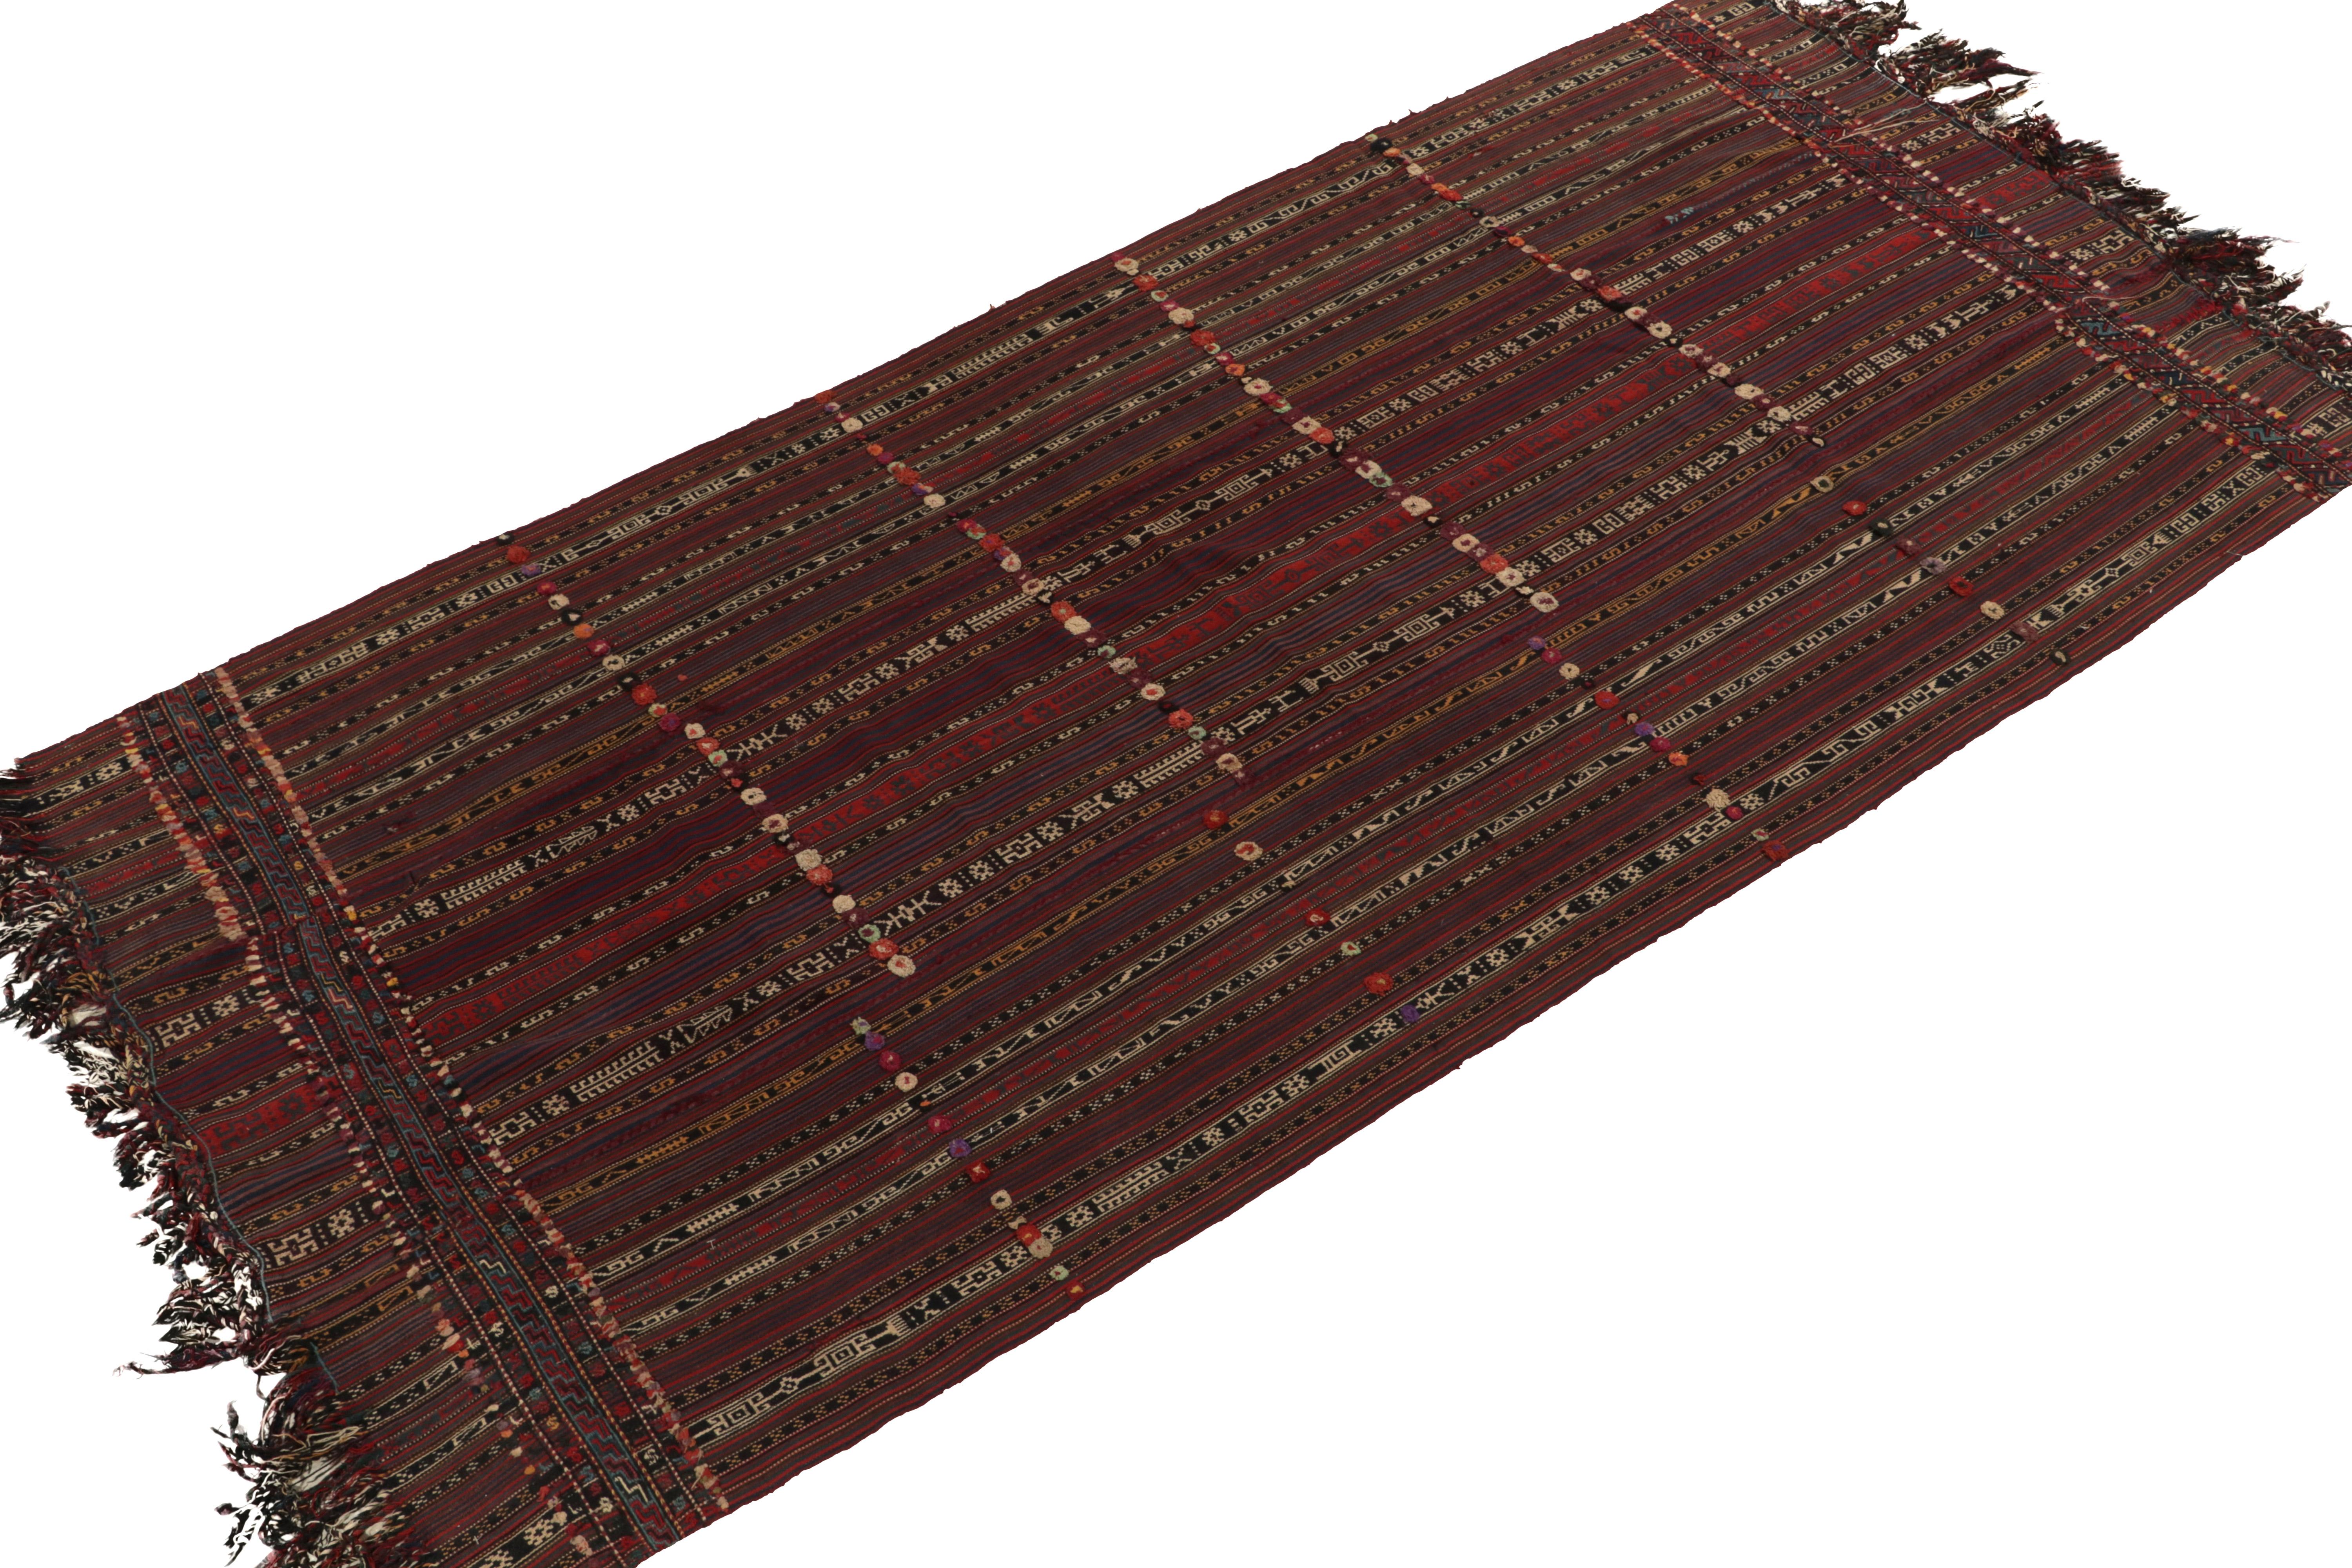 Handwoven in wool, a 5x10 Persian tribal Kilim originating circa 1950-1960. This particular rug style showcases a unique embroidery element in rich red & brown with colorful accents lending distinguished allure seldom seen in pieces from this era.